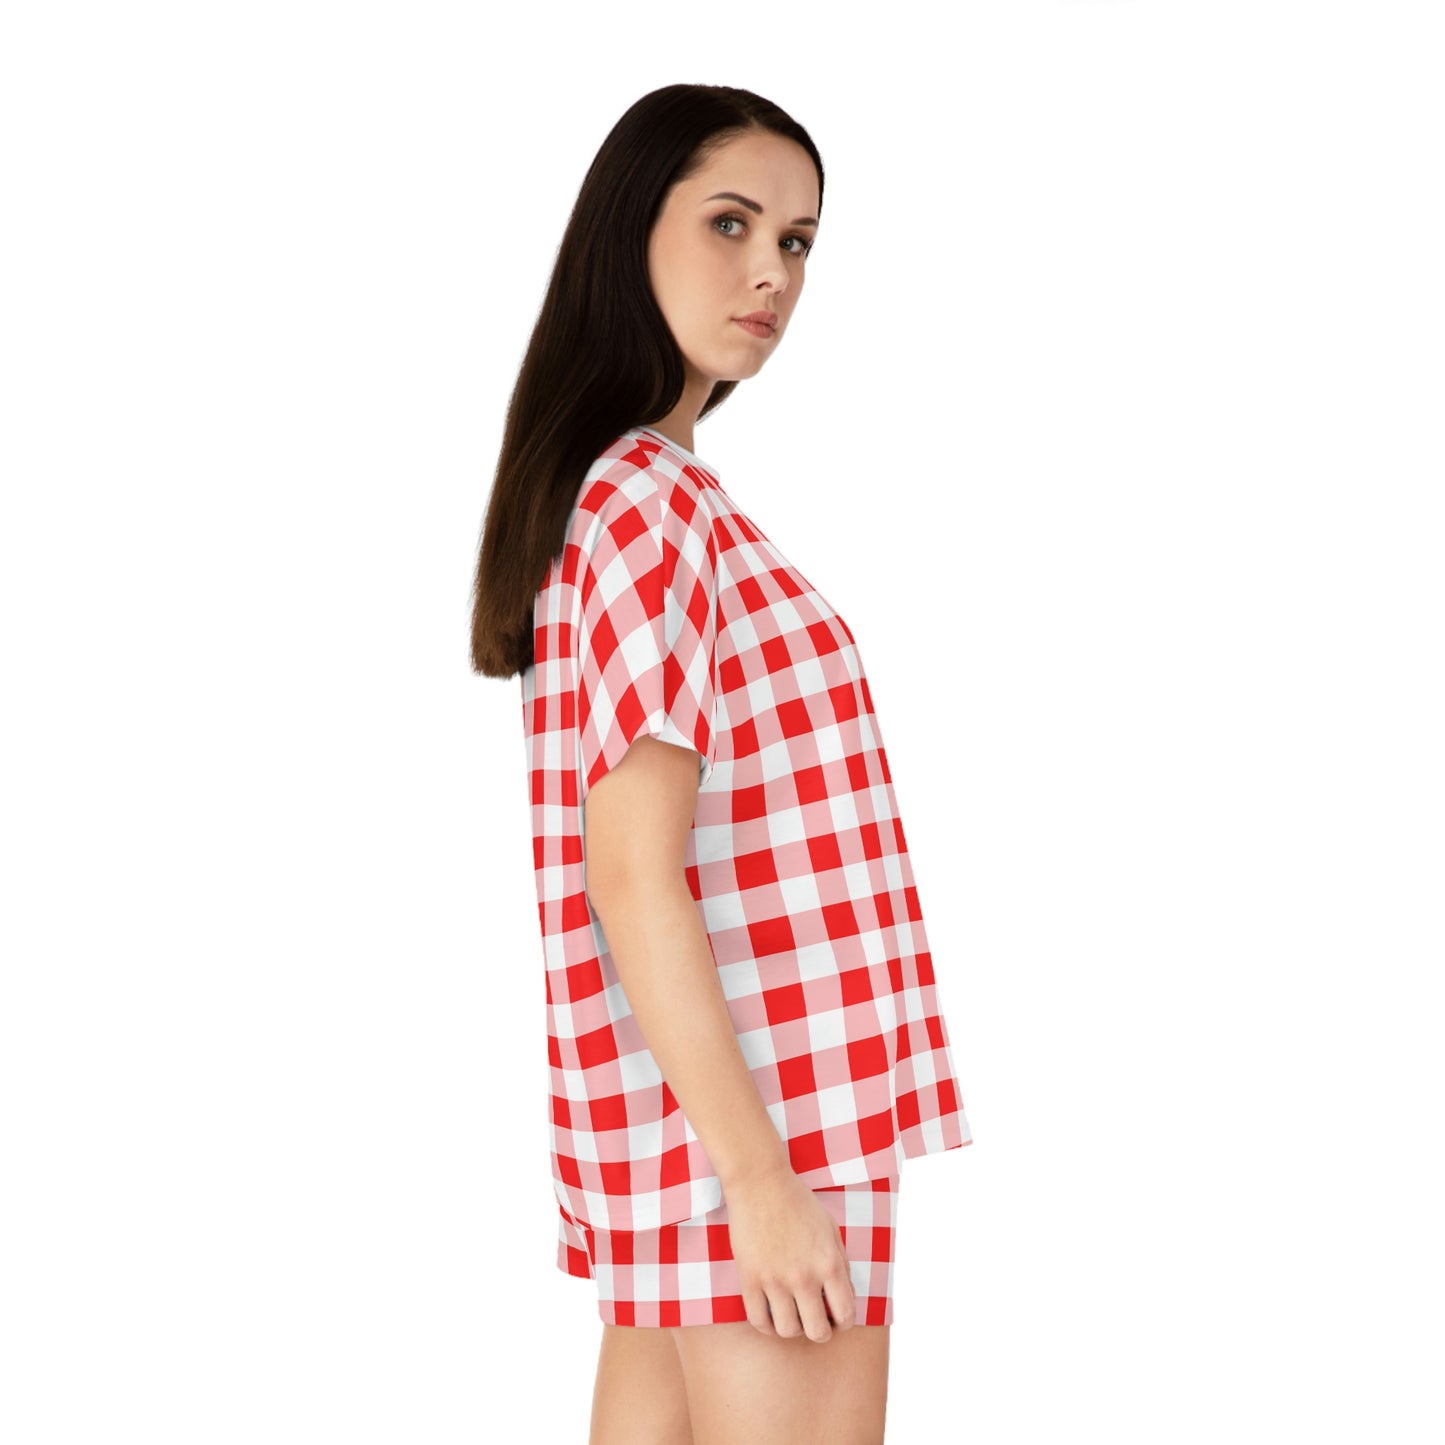 TGIF Sleepover PJs in Ruby Red Gingham Tee & Pajama Shorts-Set | Pinup Couture Relaxed